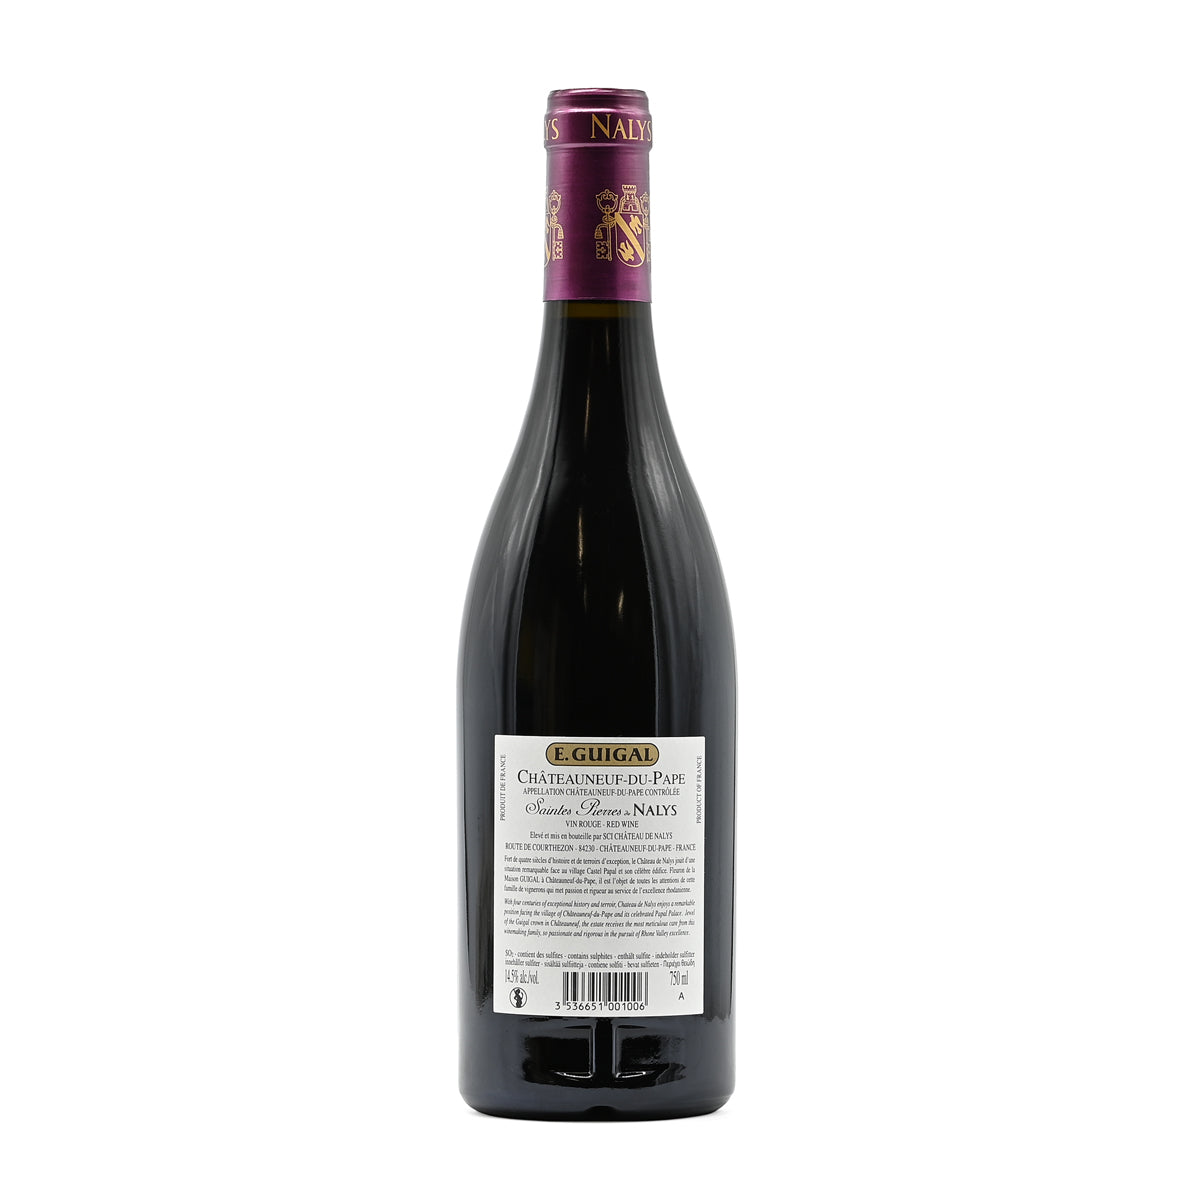 Guigal Chateauneuf du Pape Saintes Pierres de Nalys 2017, 750ml French red wine, made from a blend of Grenache, Syrah, Cinsault, Muscardin, Mourvèdre, and Counoise; from Chateauneuf-du-Pape, Southern Rhone, France – GDV Fine Wines, Hong Kong